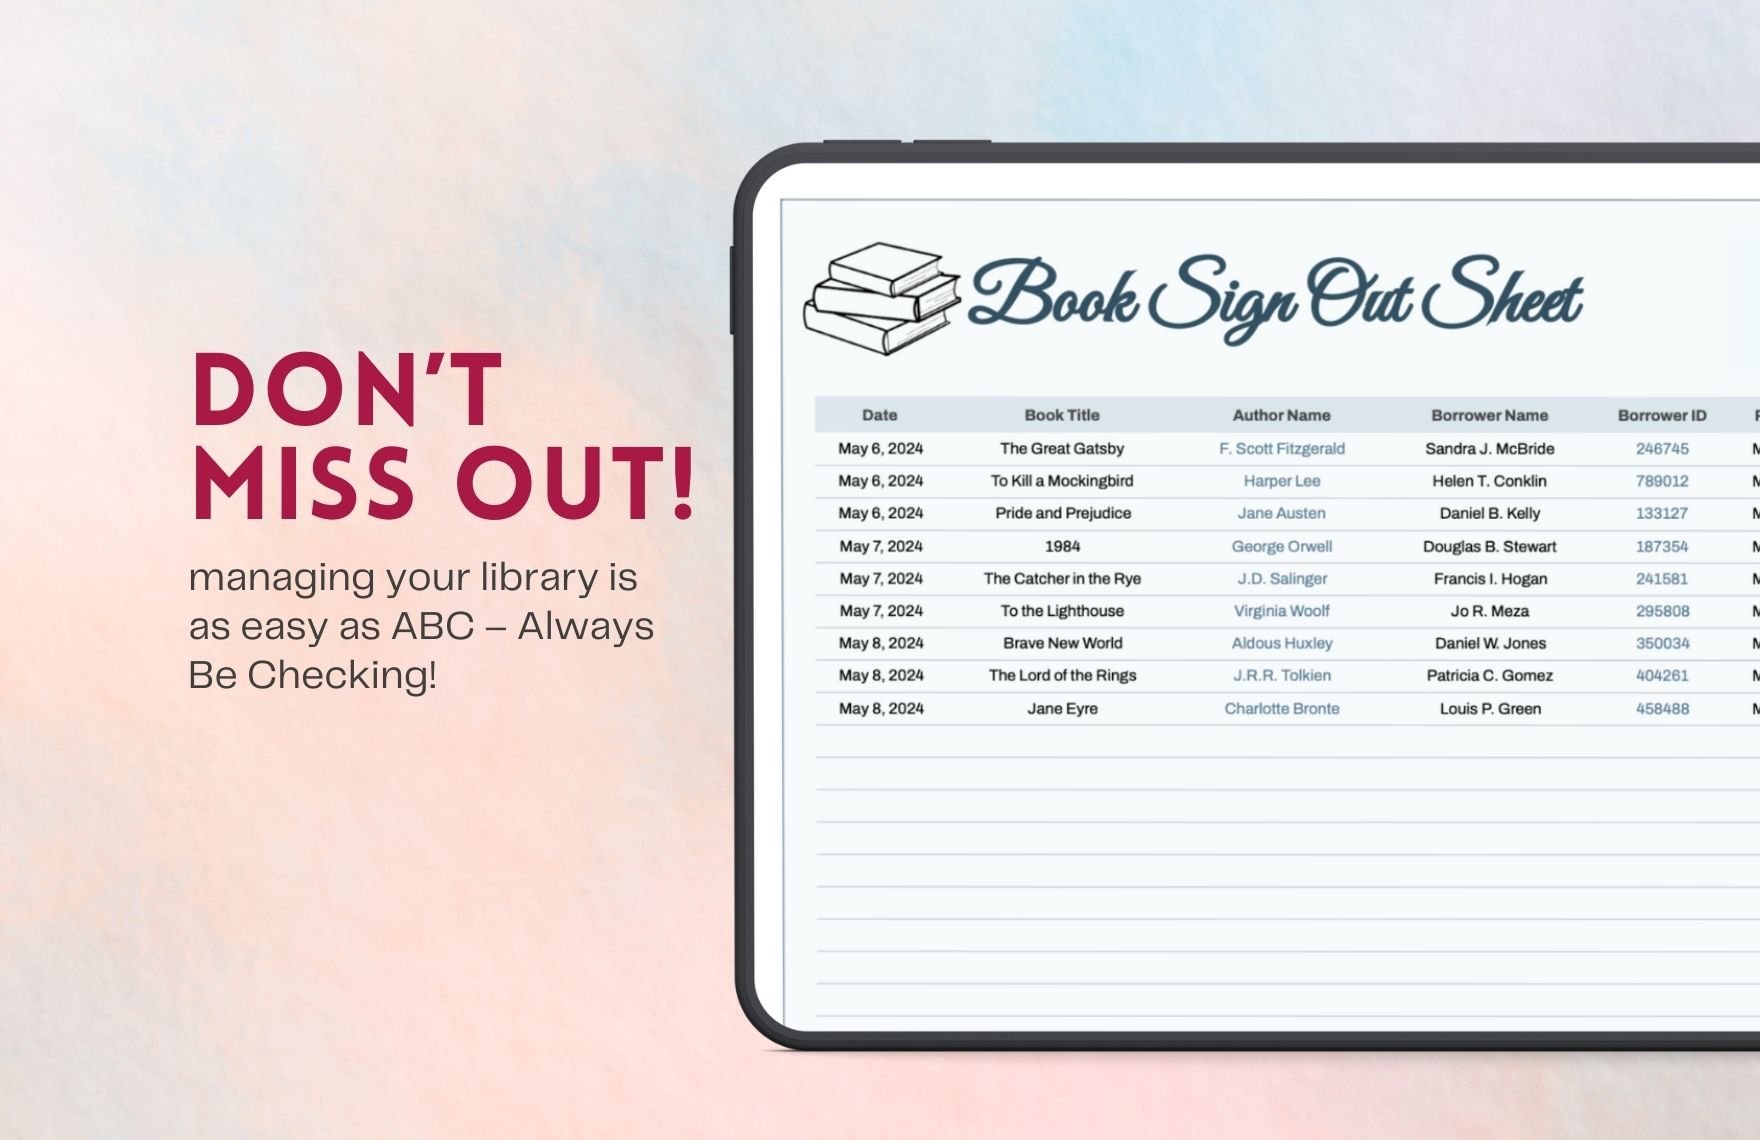 Book Sign Out Sheet Template